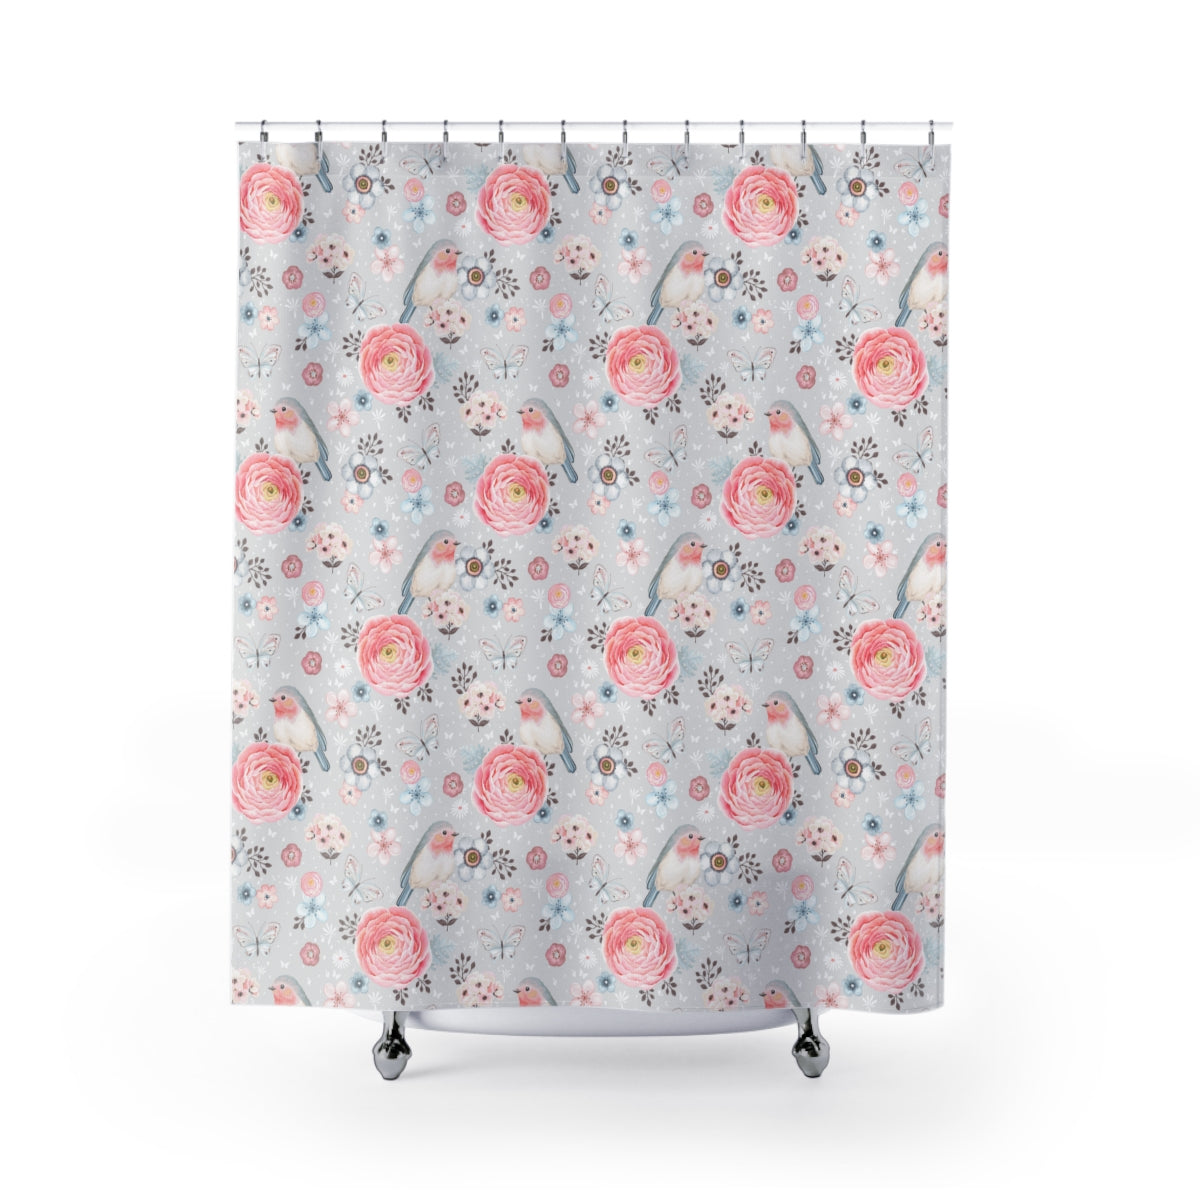 Robins and Flowers Shower Curtain